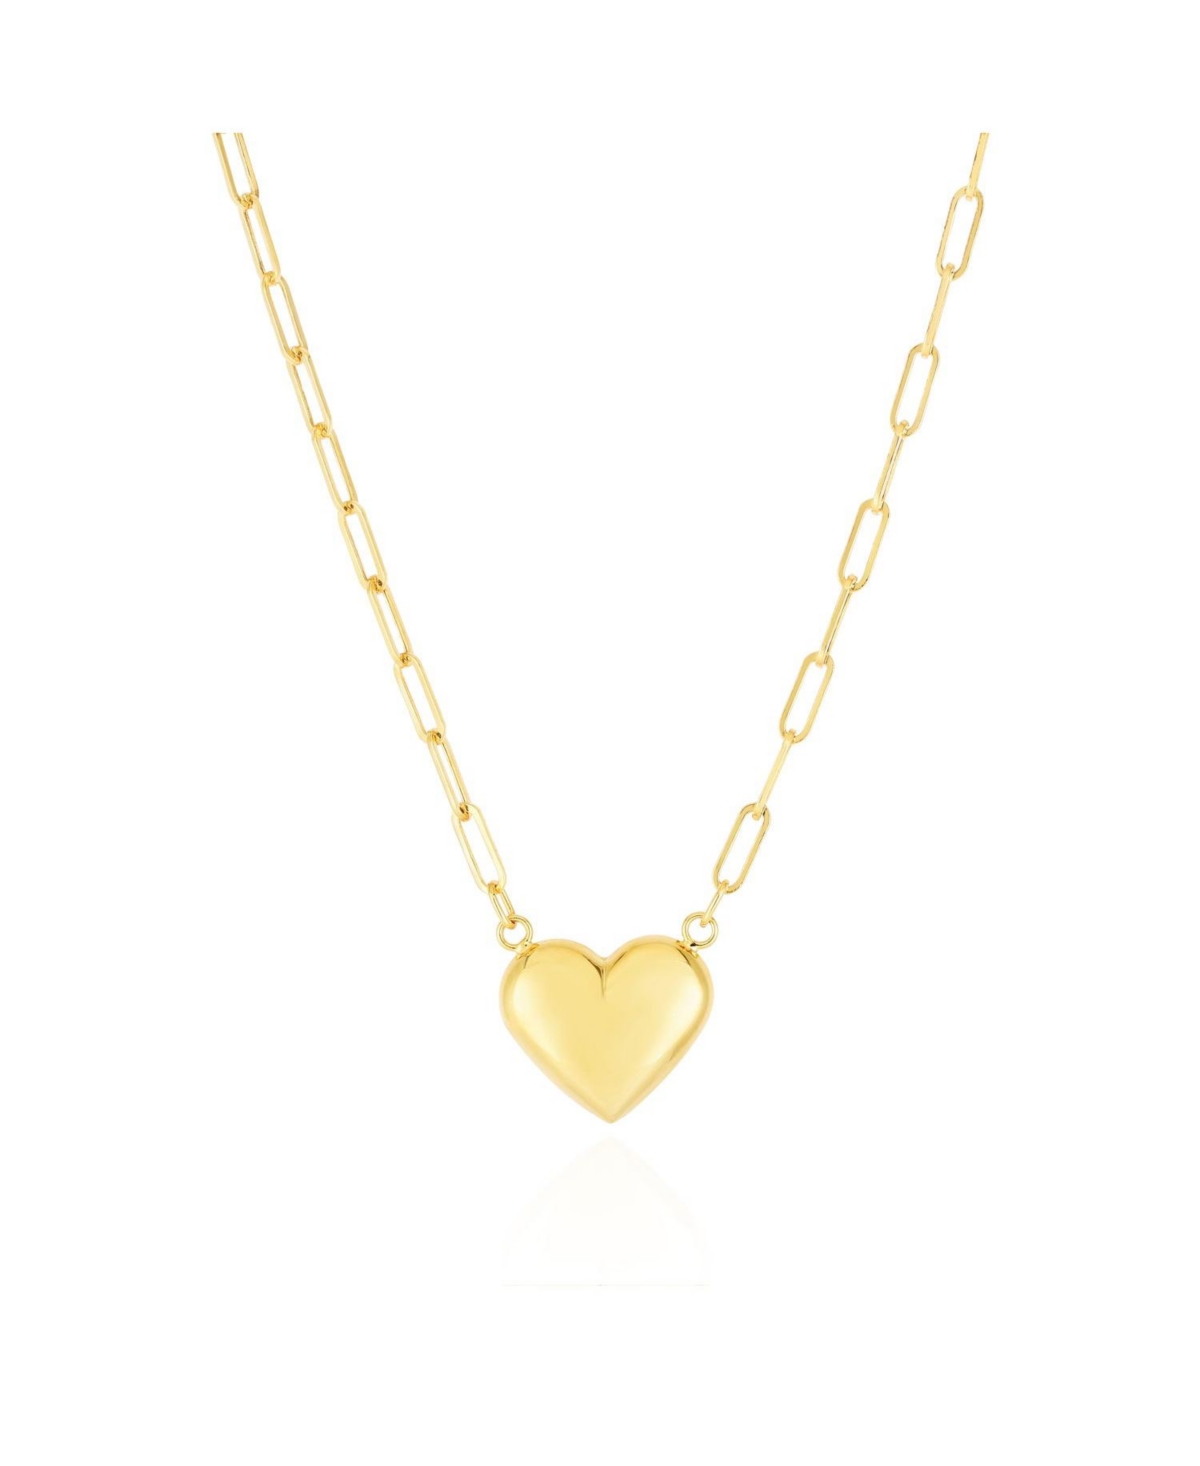 Puffy Gold Paperclip Heart Necklace - Gold